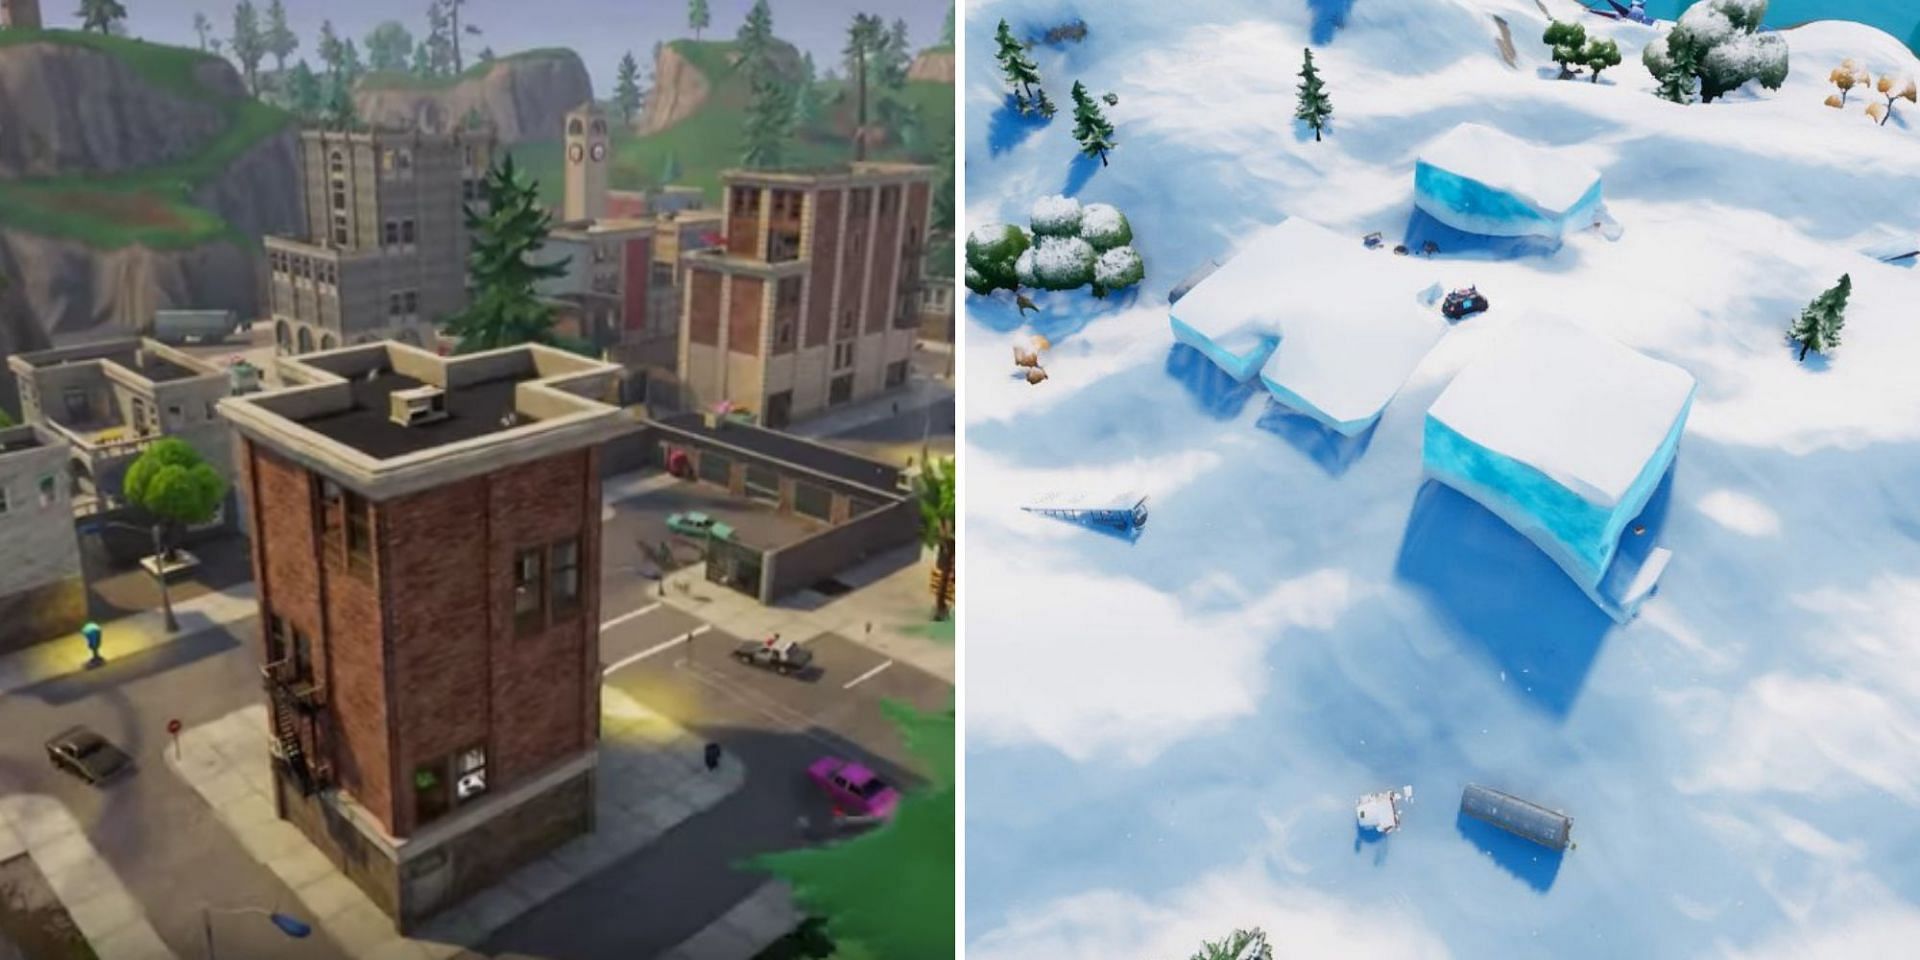 Tilted Towers is currently buried under snow in Fortnite Chapter 3 Season 1 (Image via Fortnite)